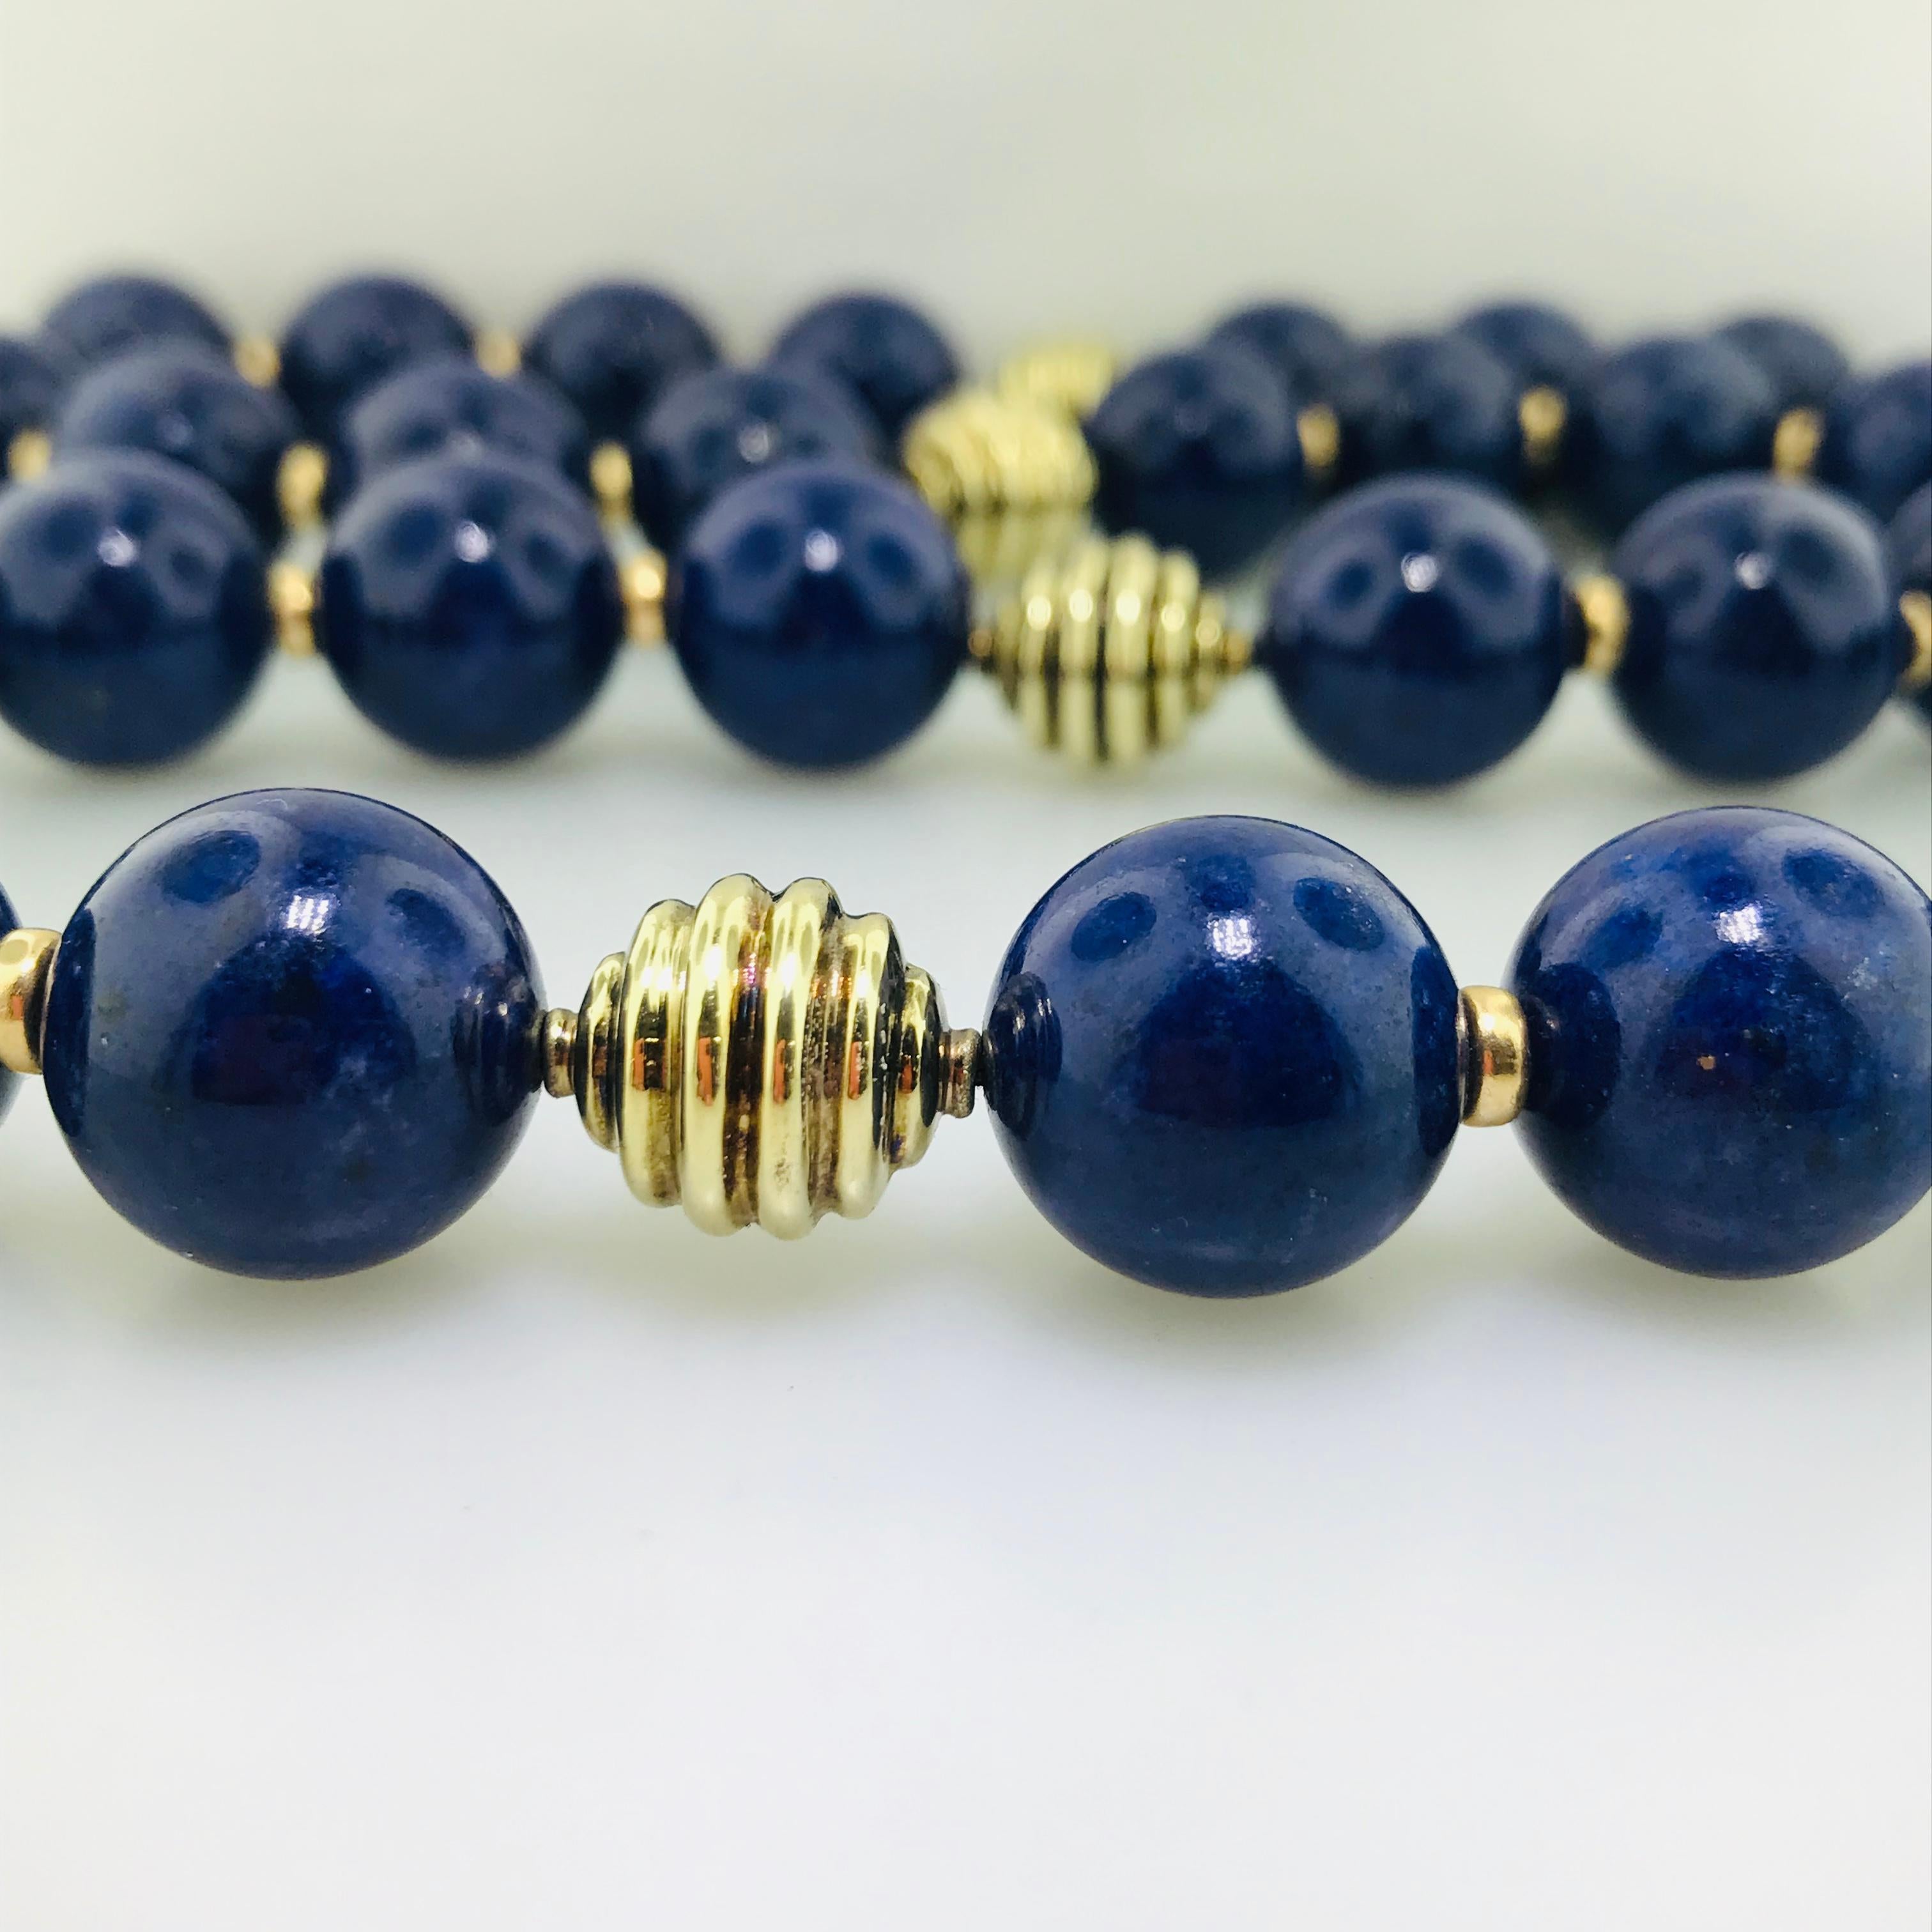 265.00 CTS NATURAL UNTREATED RICH BLUE LAPIS LAZULI ROUND BEADS NECKLACE BEST